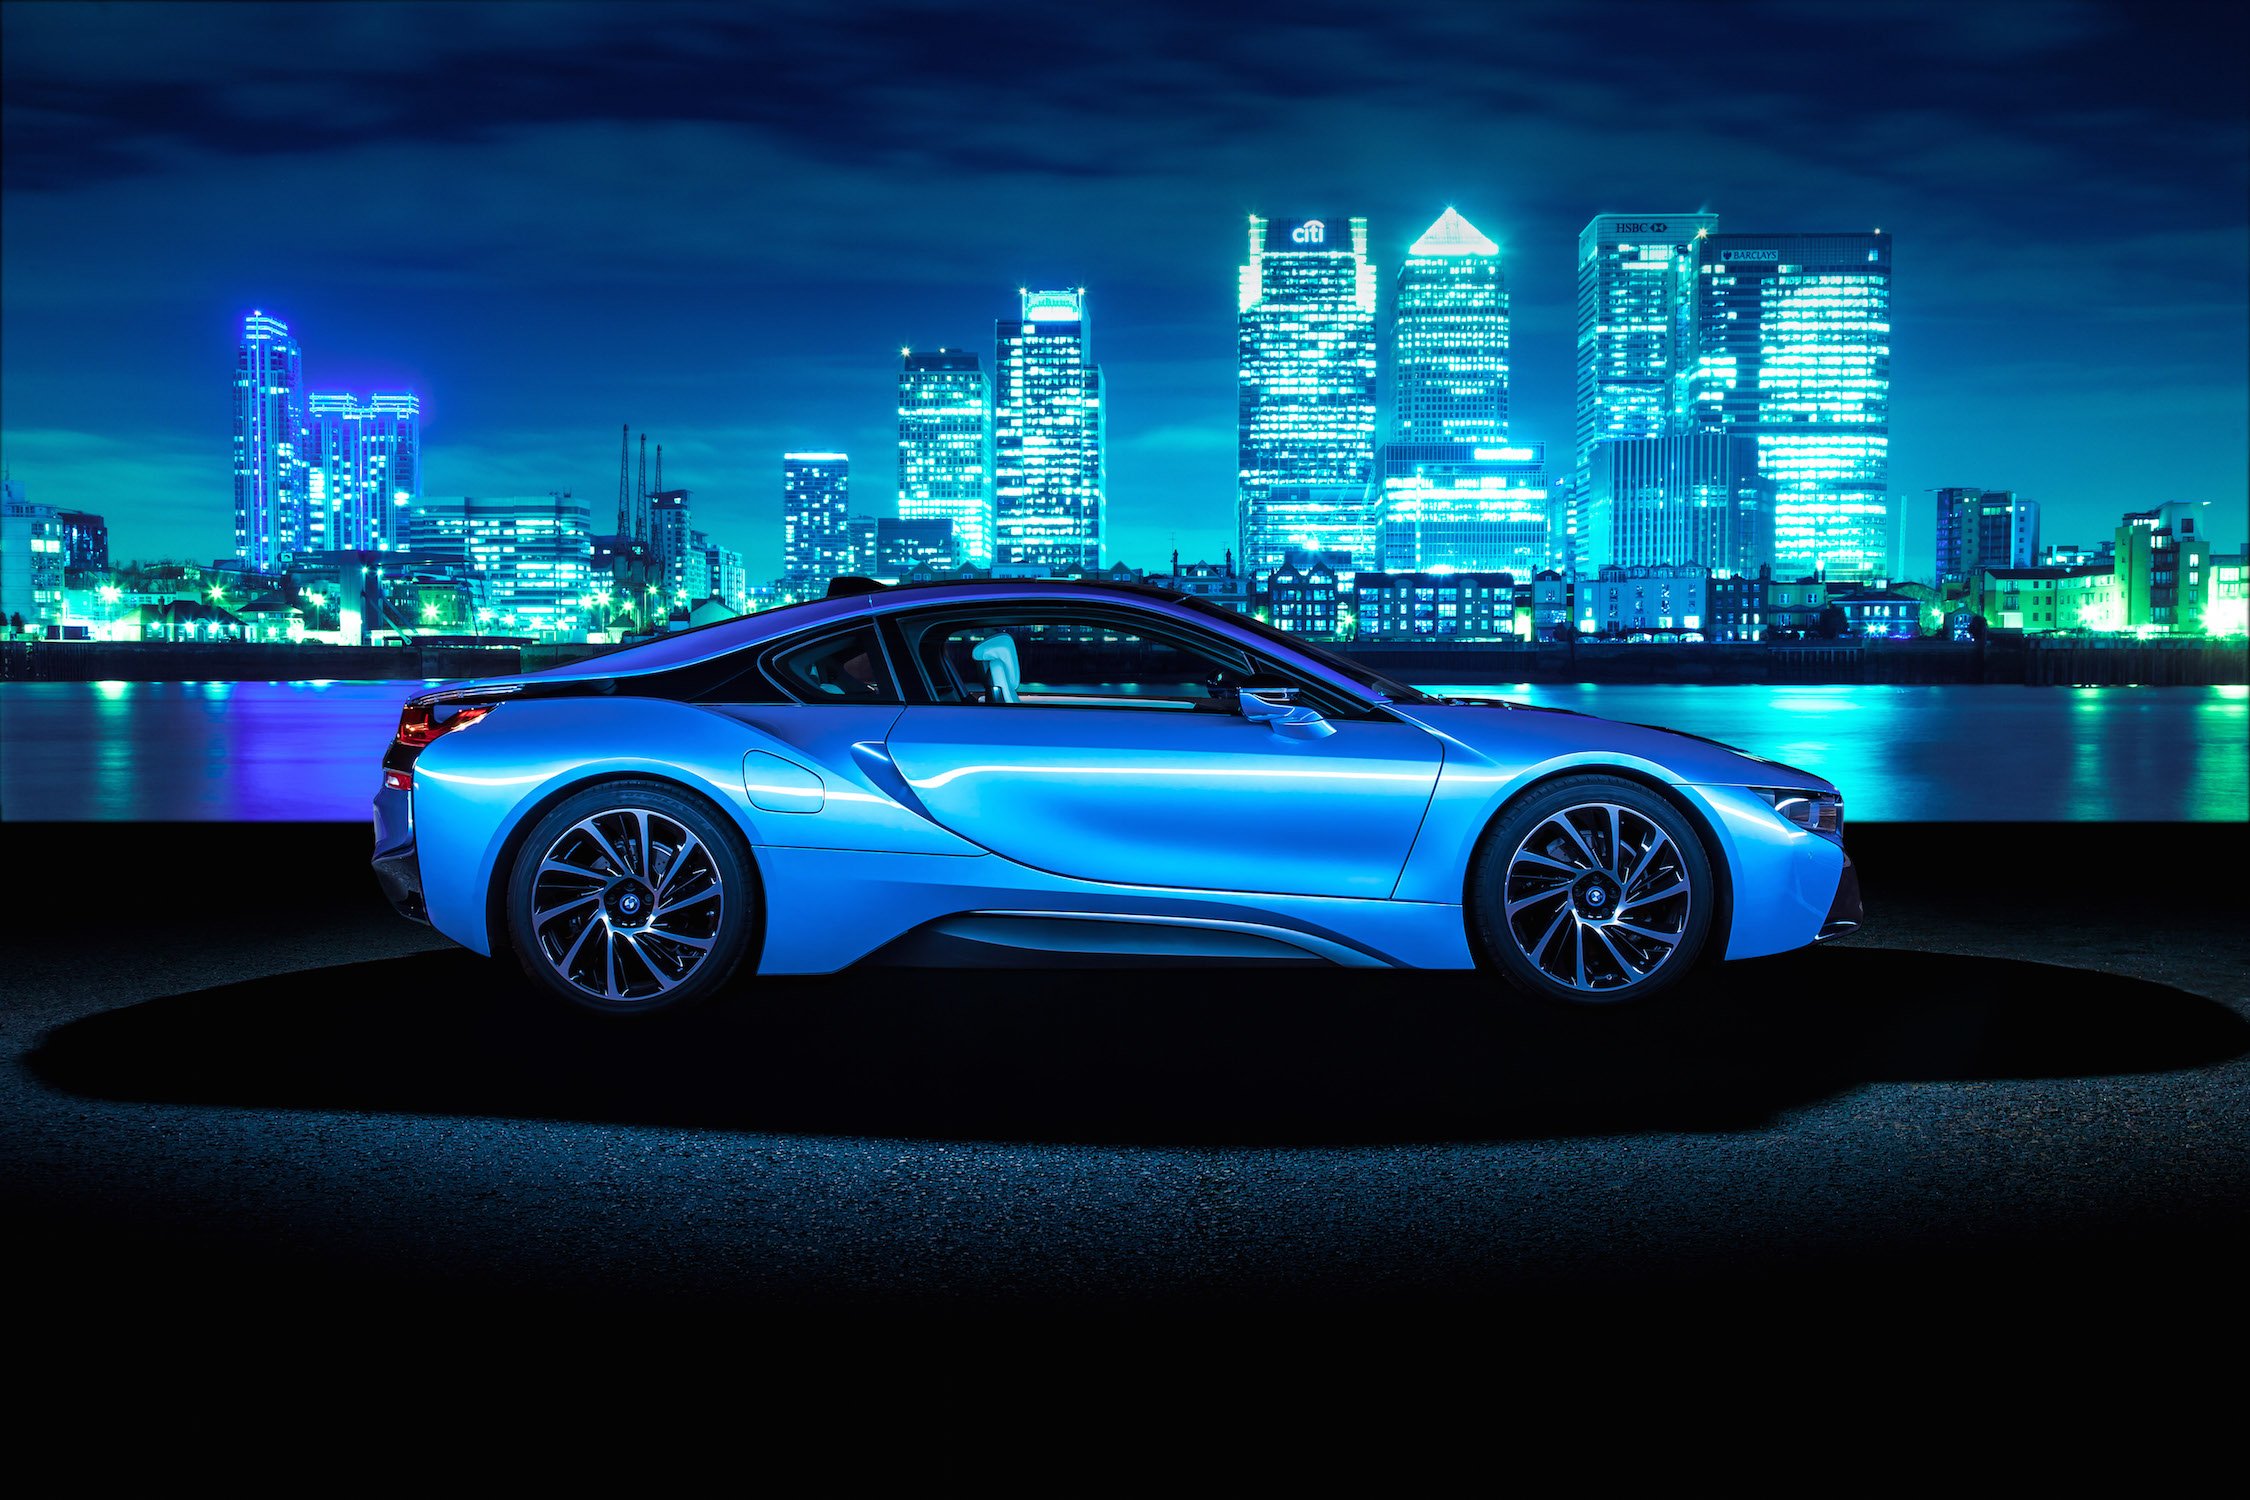 The BMW i8 supercar is officially the best car in the UK right now